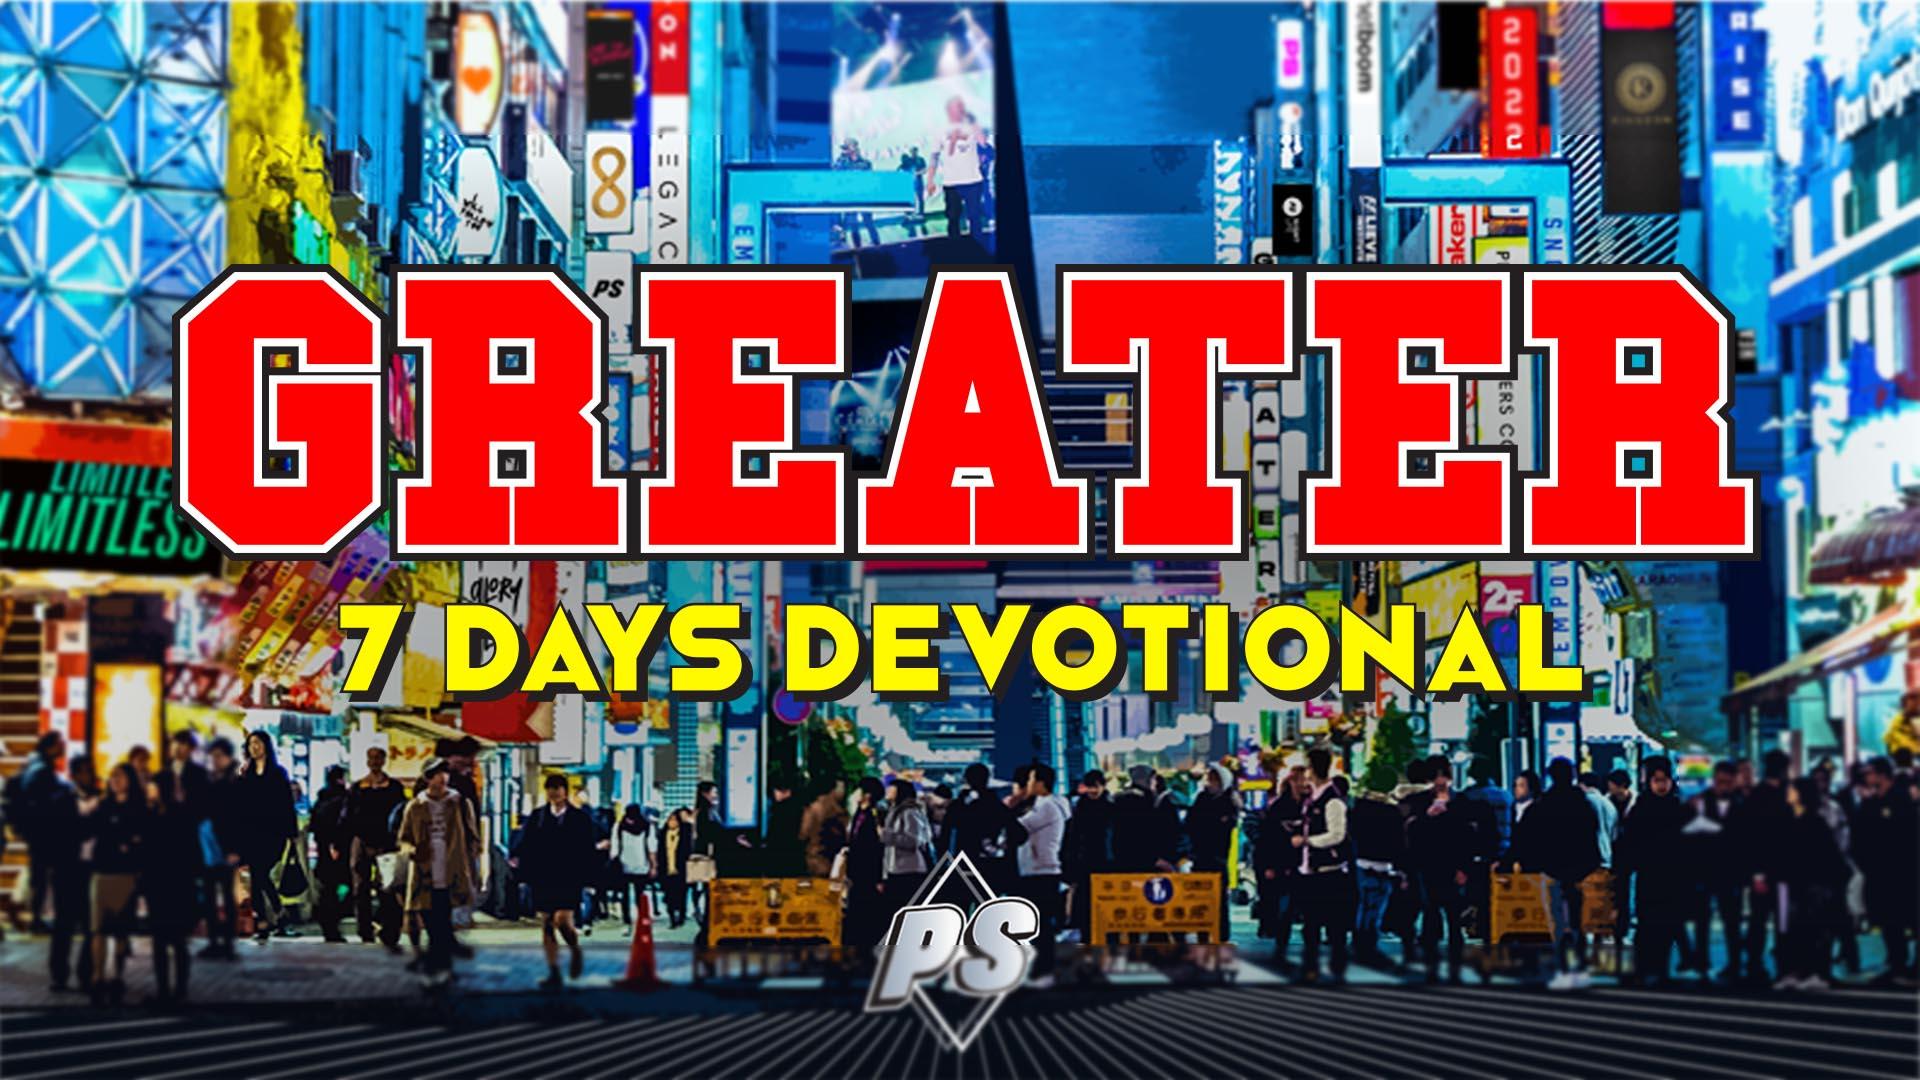 Featured Image for “Greater 7 Day Devotional"